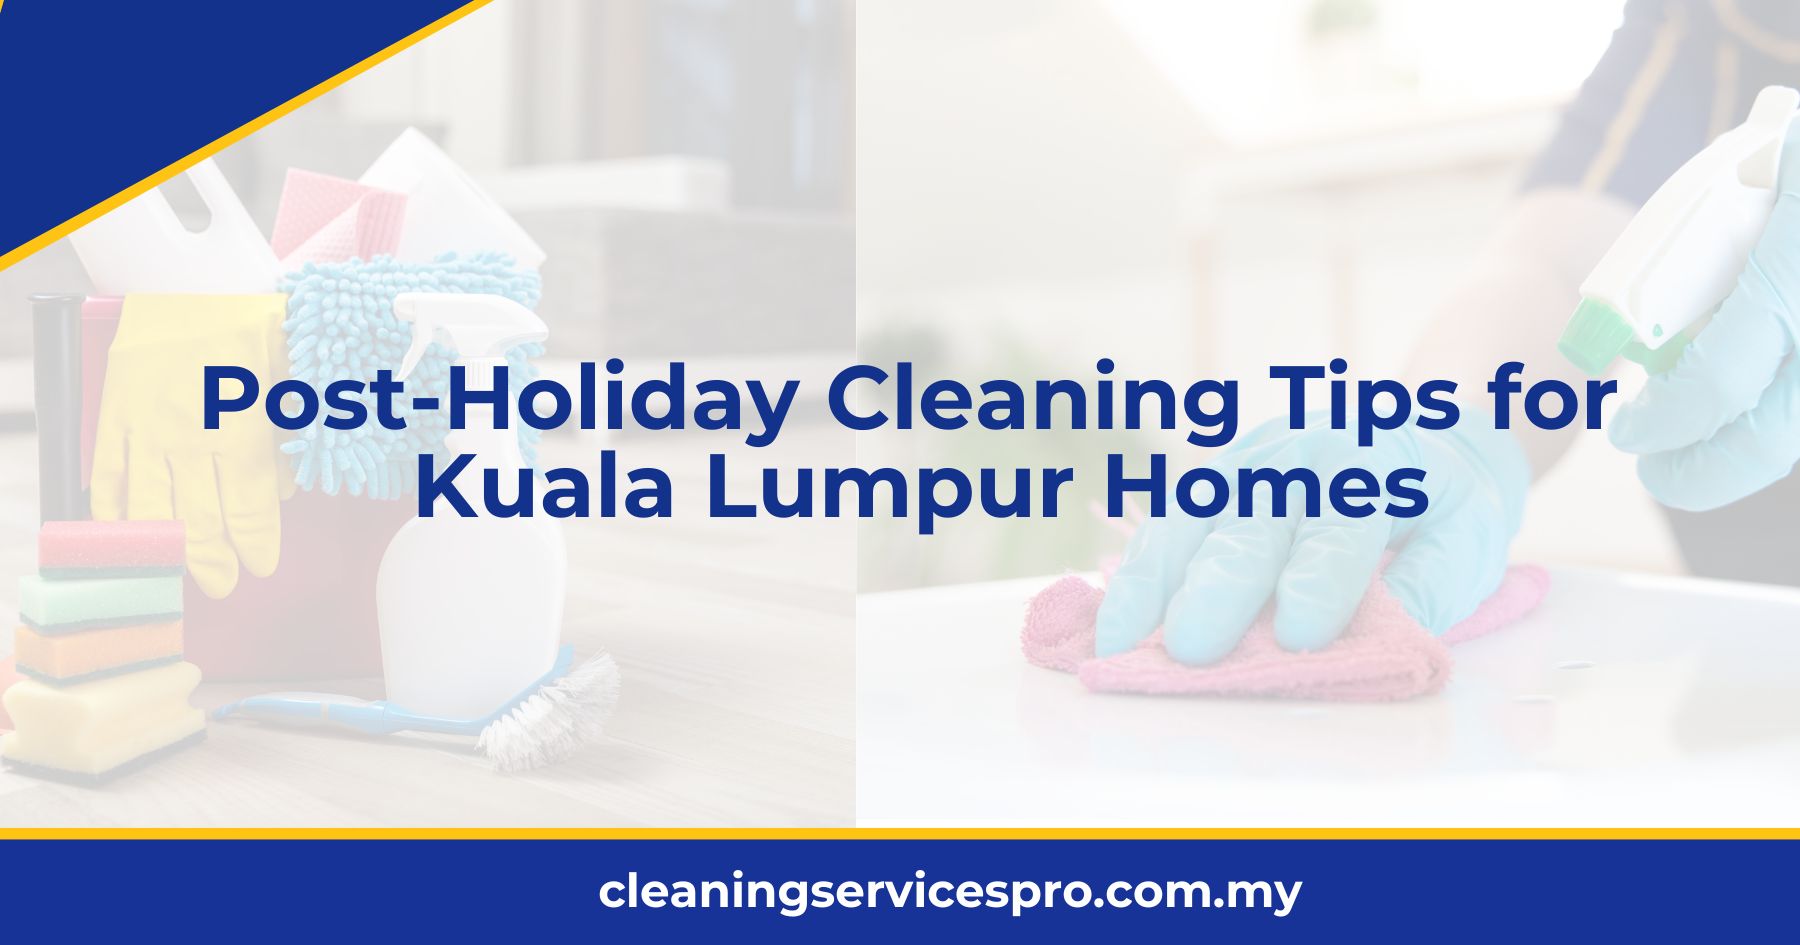 Post-Holiday Cleaning Tips for Kuala Lumpur Homes